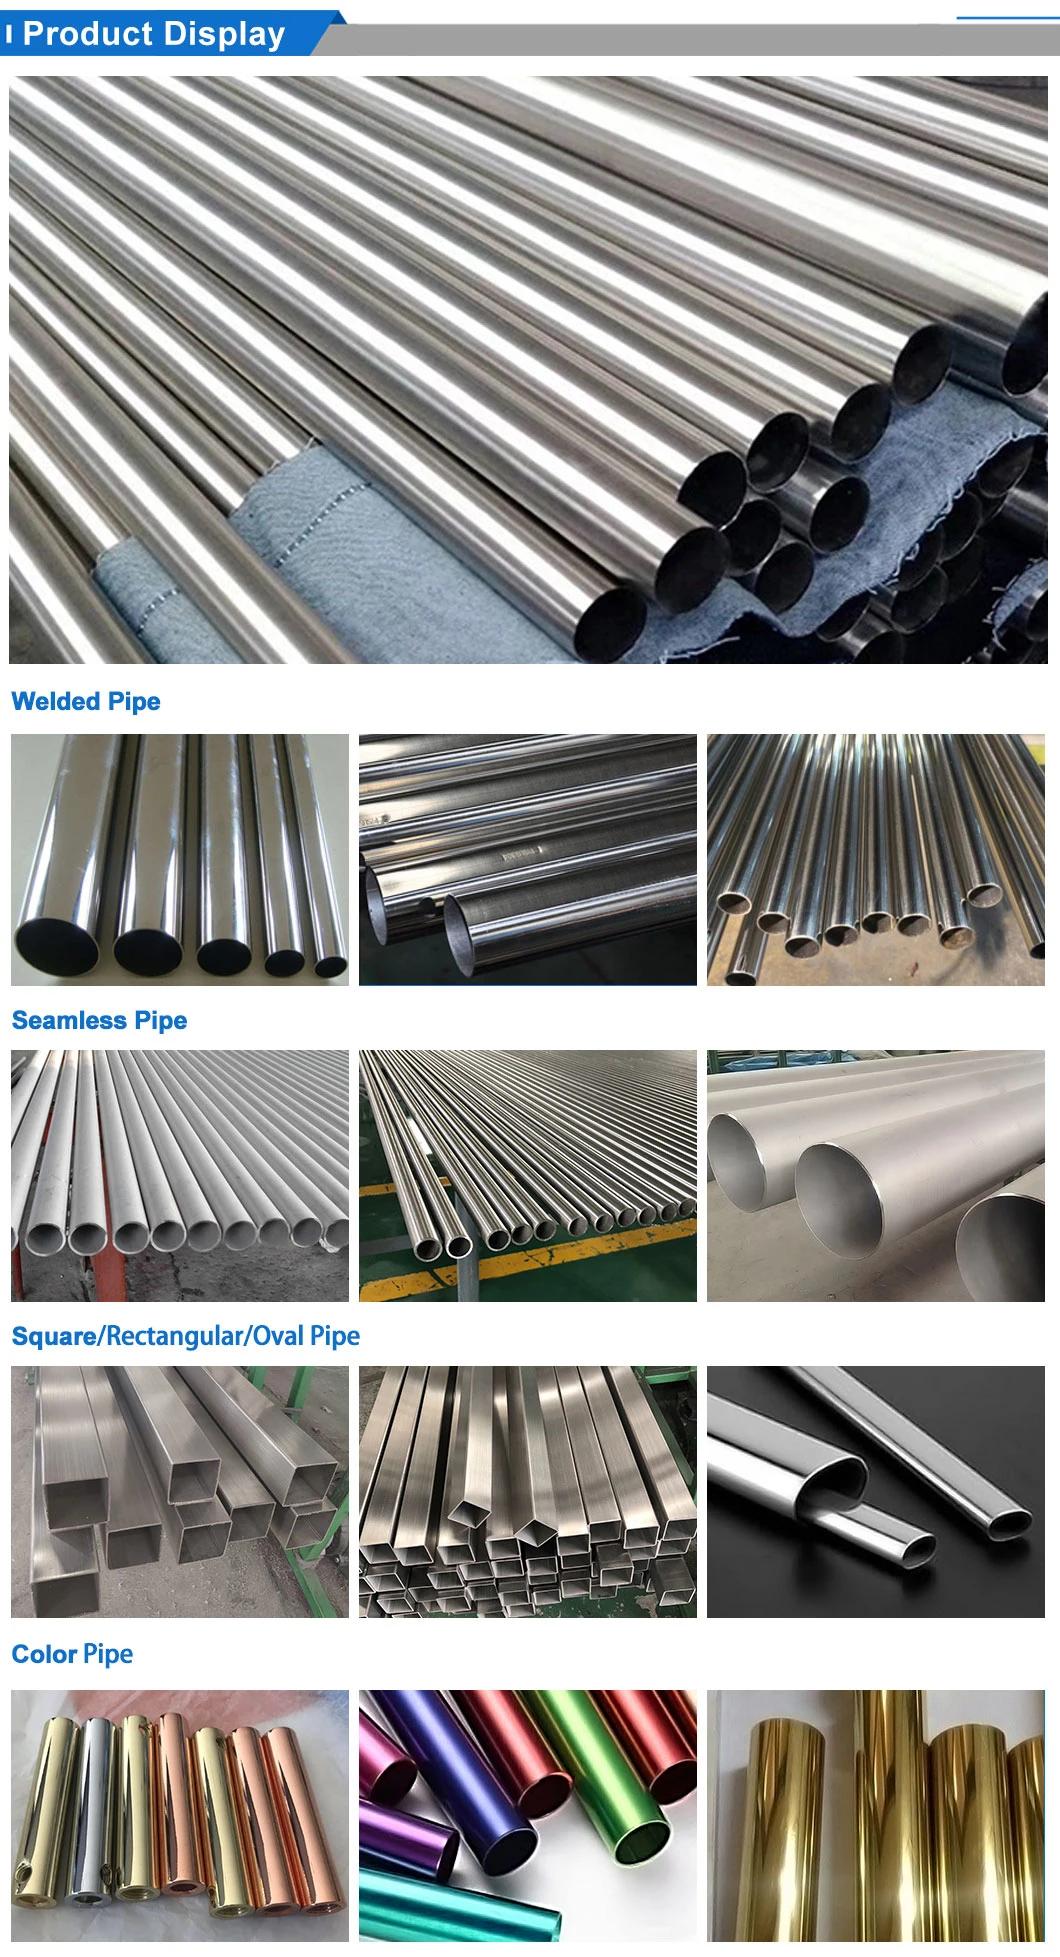 304 Ss Pipe Seamless Stainless Schedule 80 Steel Tube Price Per Meter